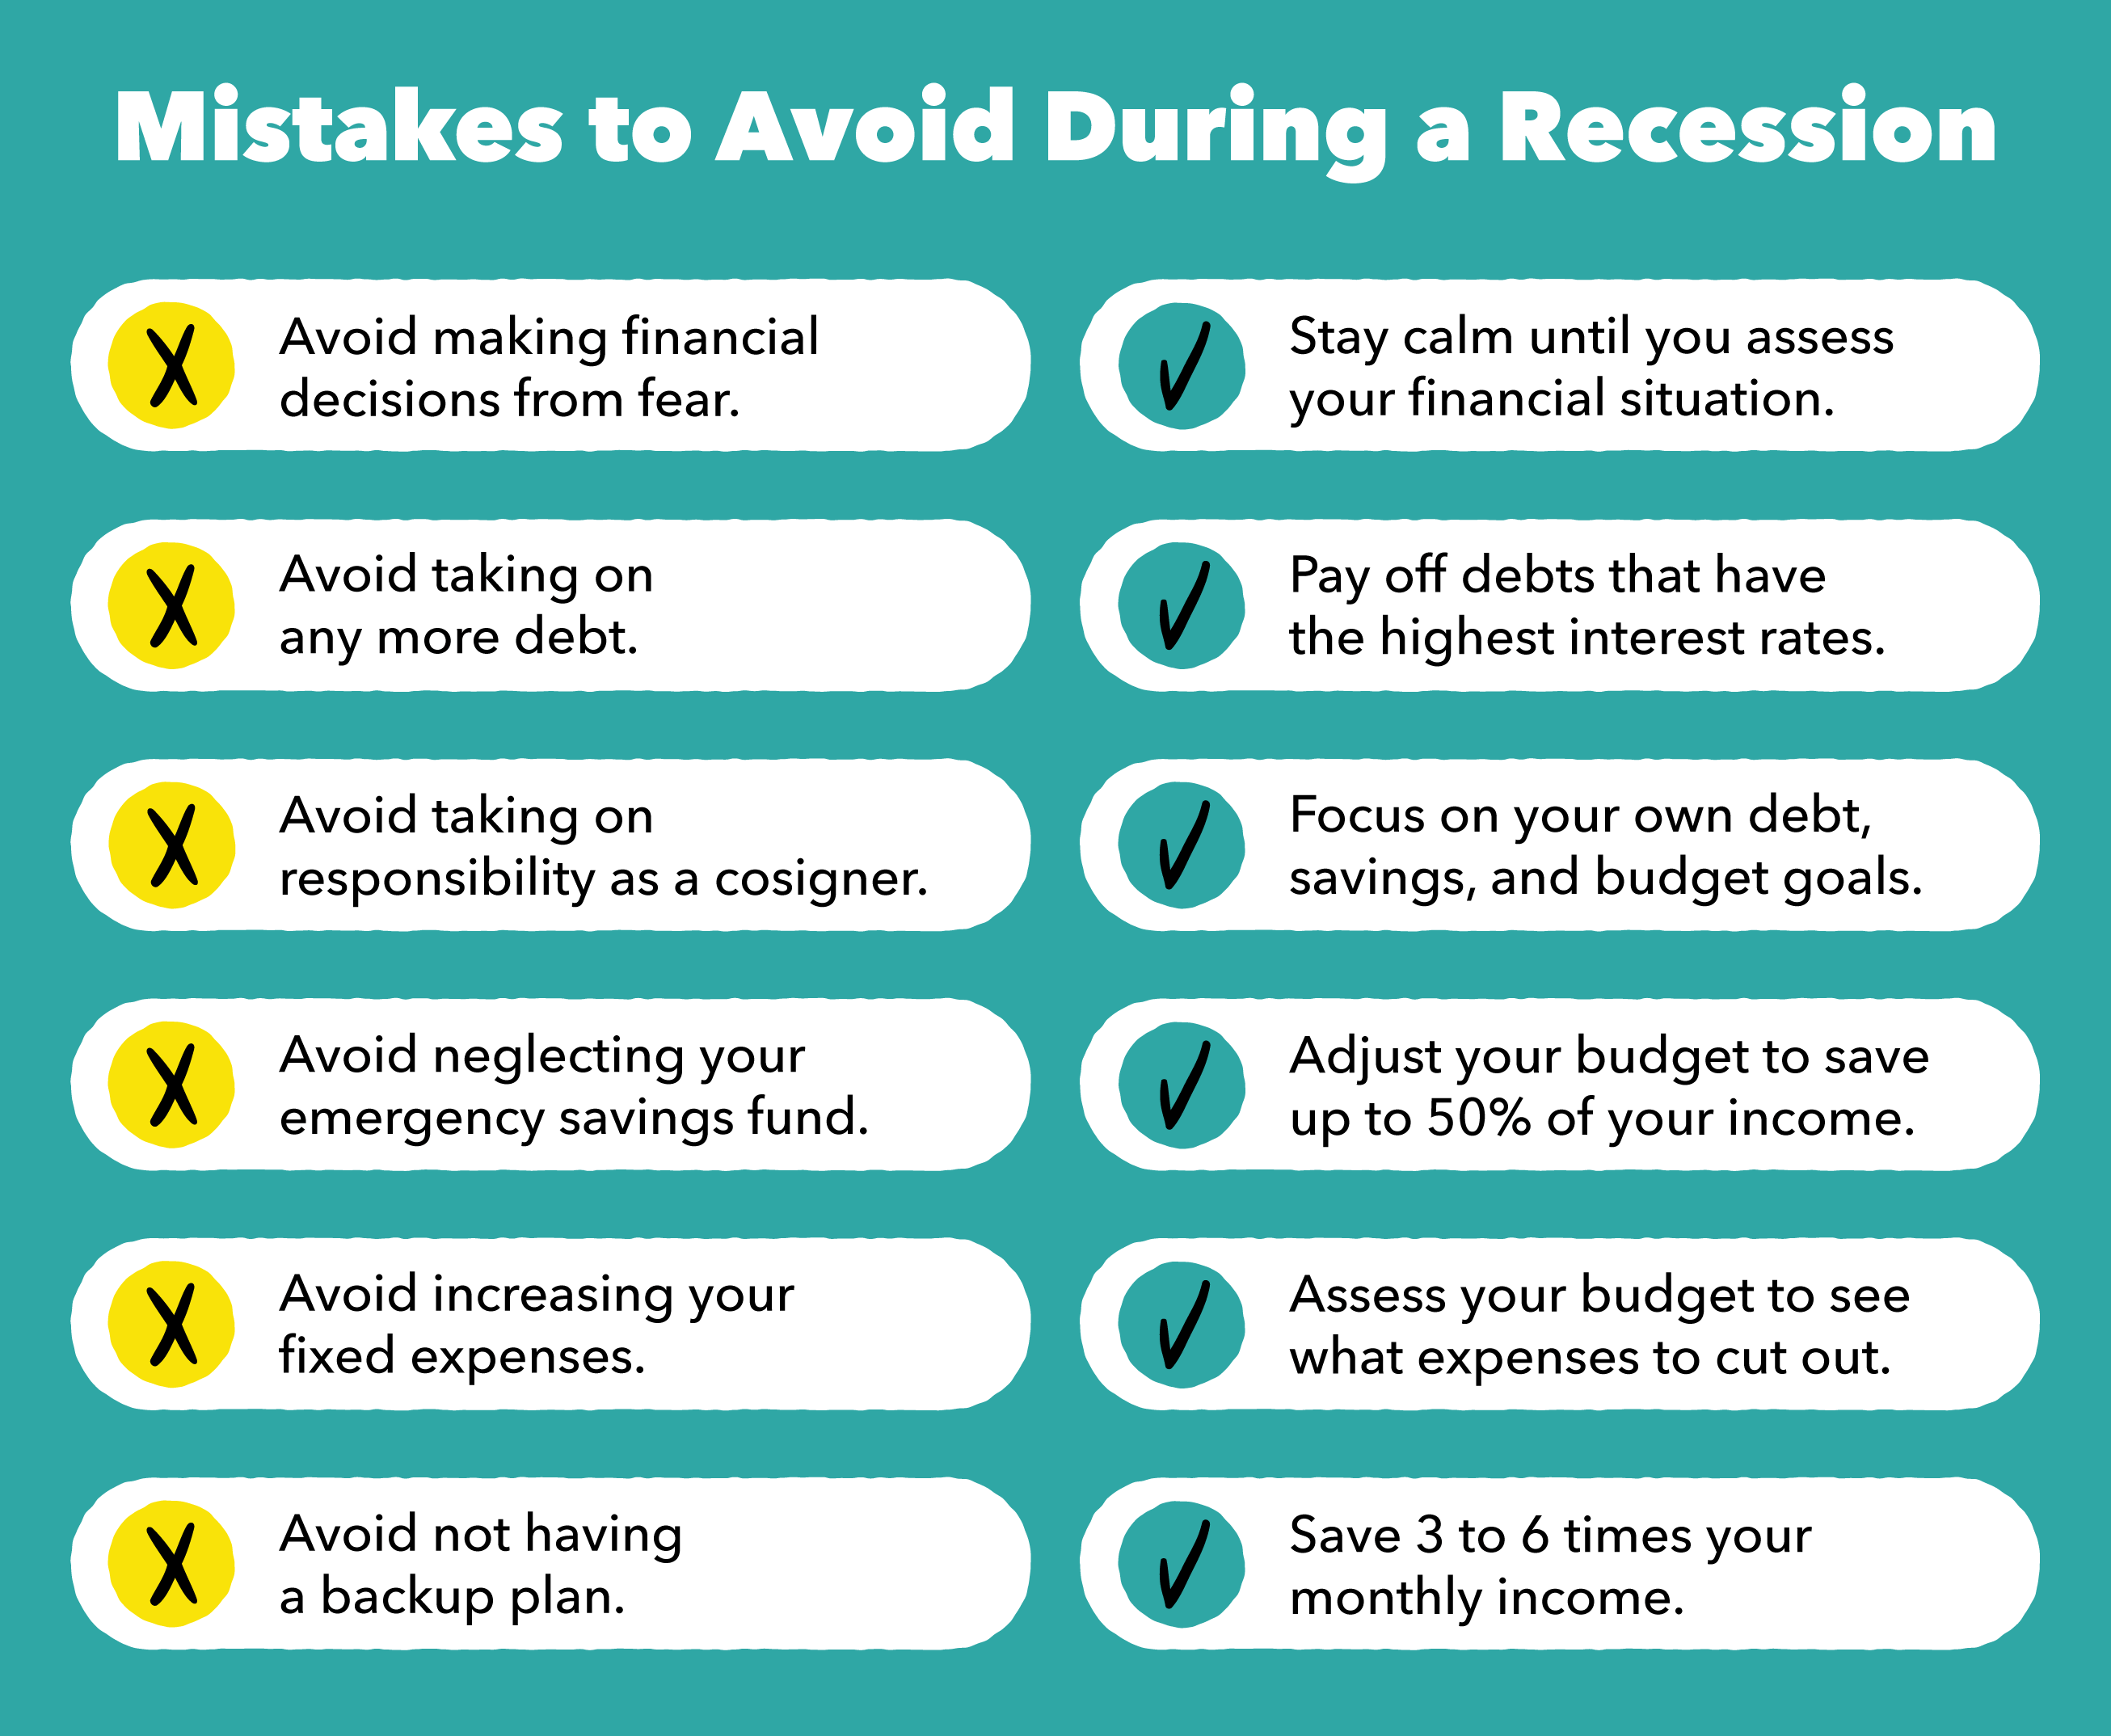 Mistakes to Avoid During a Recession